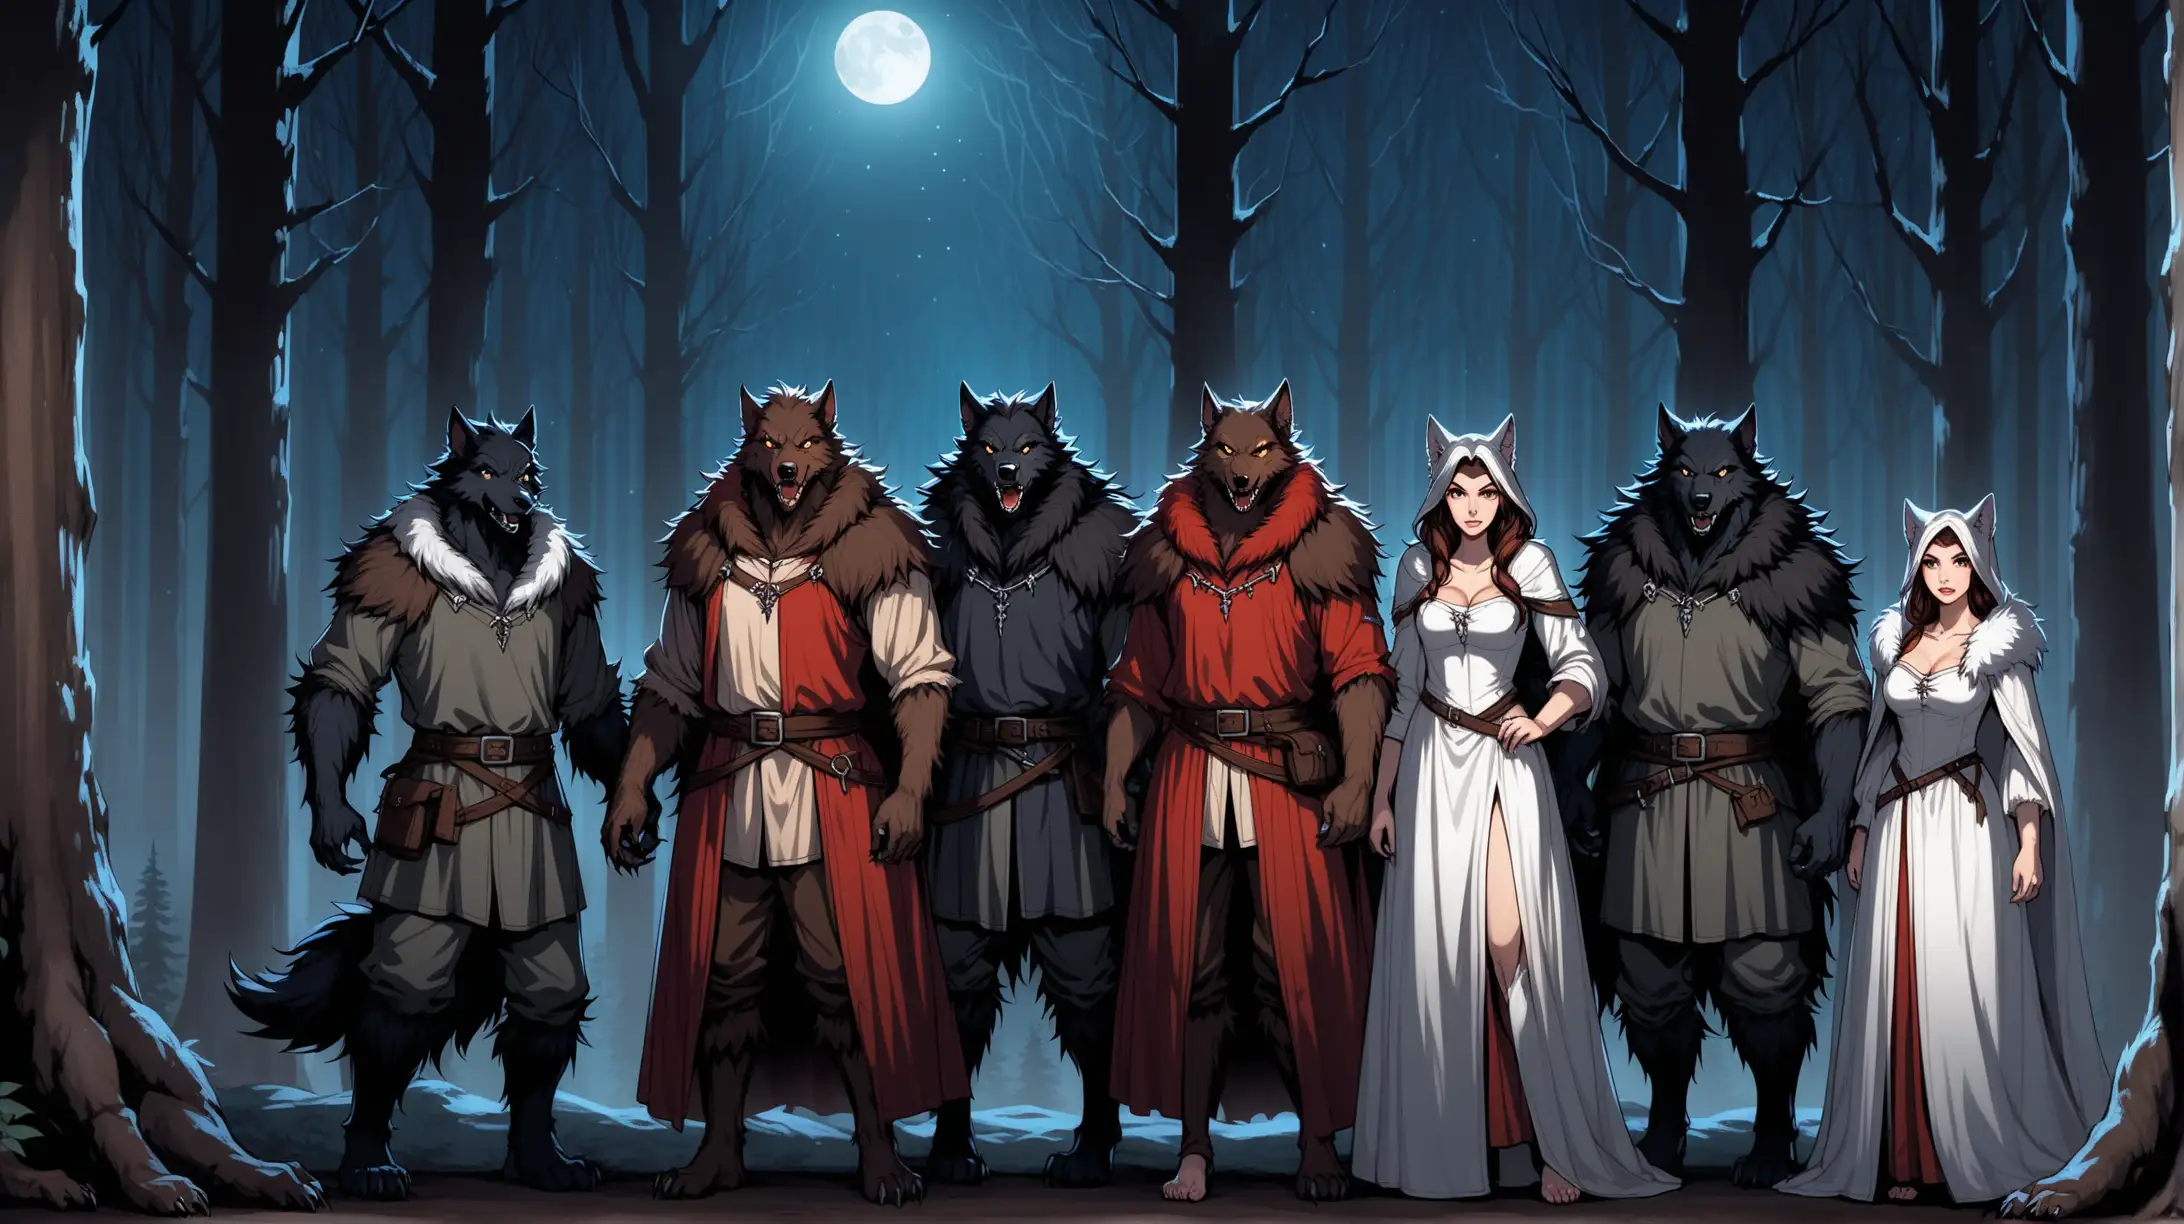 European Werewolf Pack Roaming Medieval Forest at Night